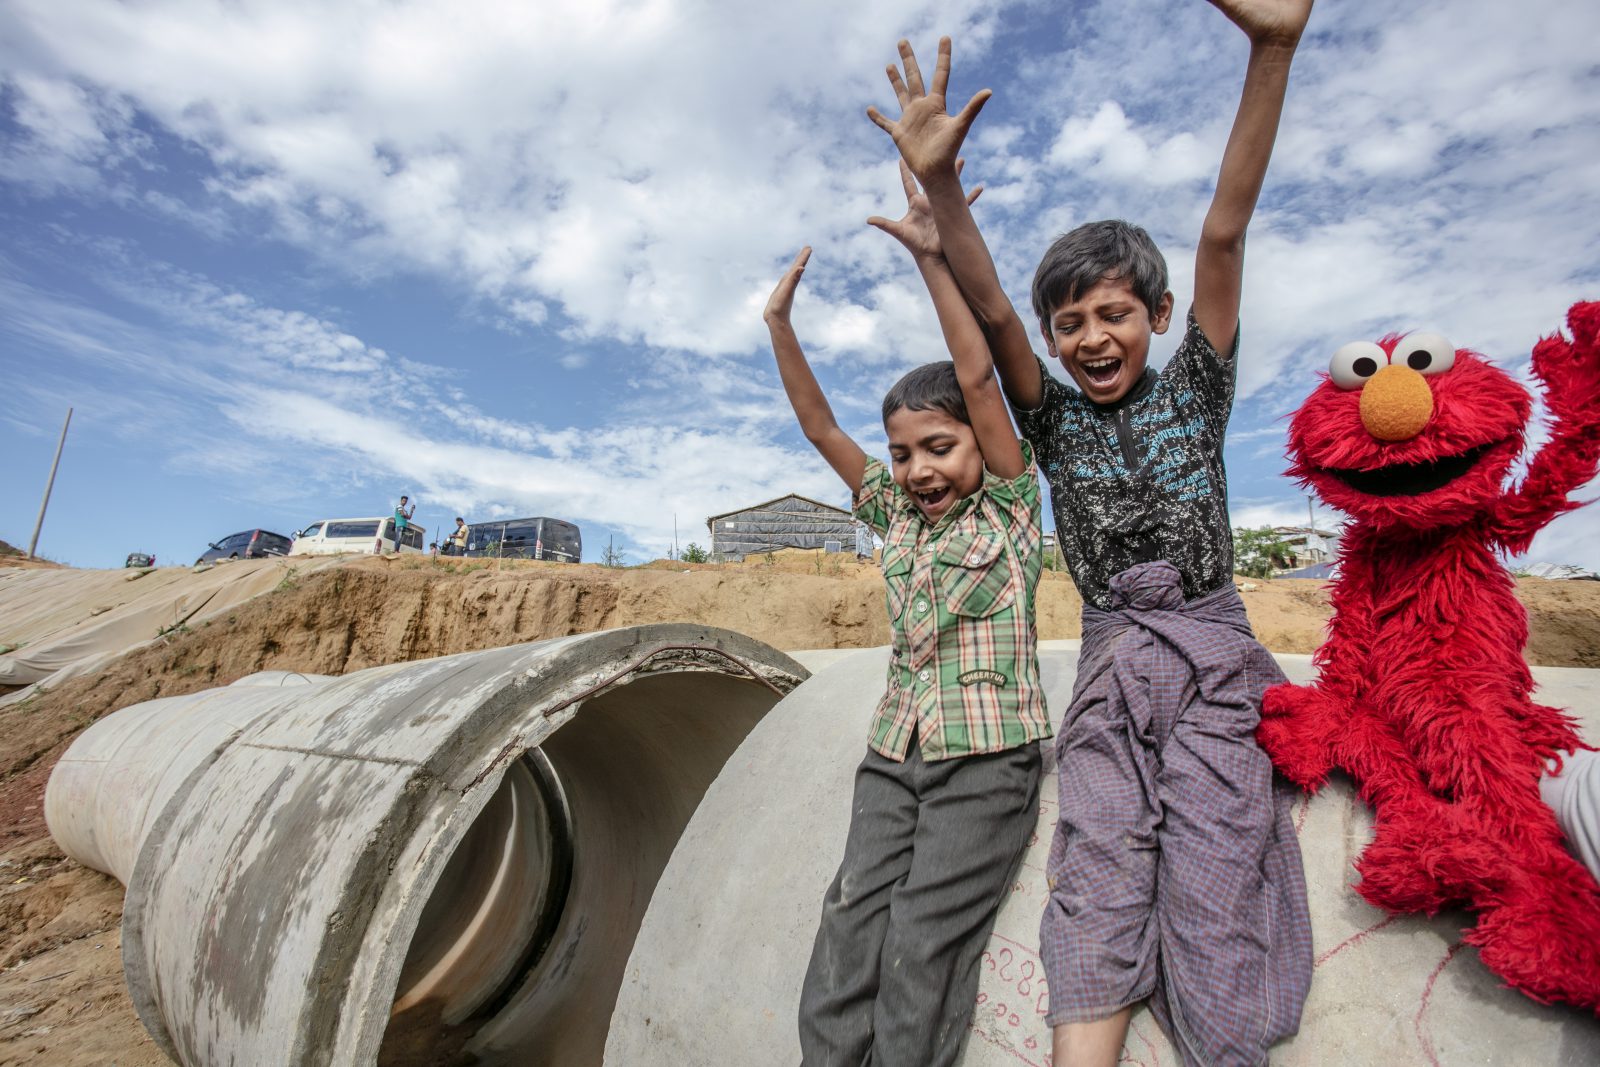 Two Rohingya refugee children have once in a life time moment with Elmo! More than 900,000 Rohingya refugees are now living in Bangladesh – nearly 60 percent of those refugees are children.